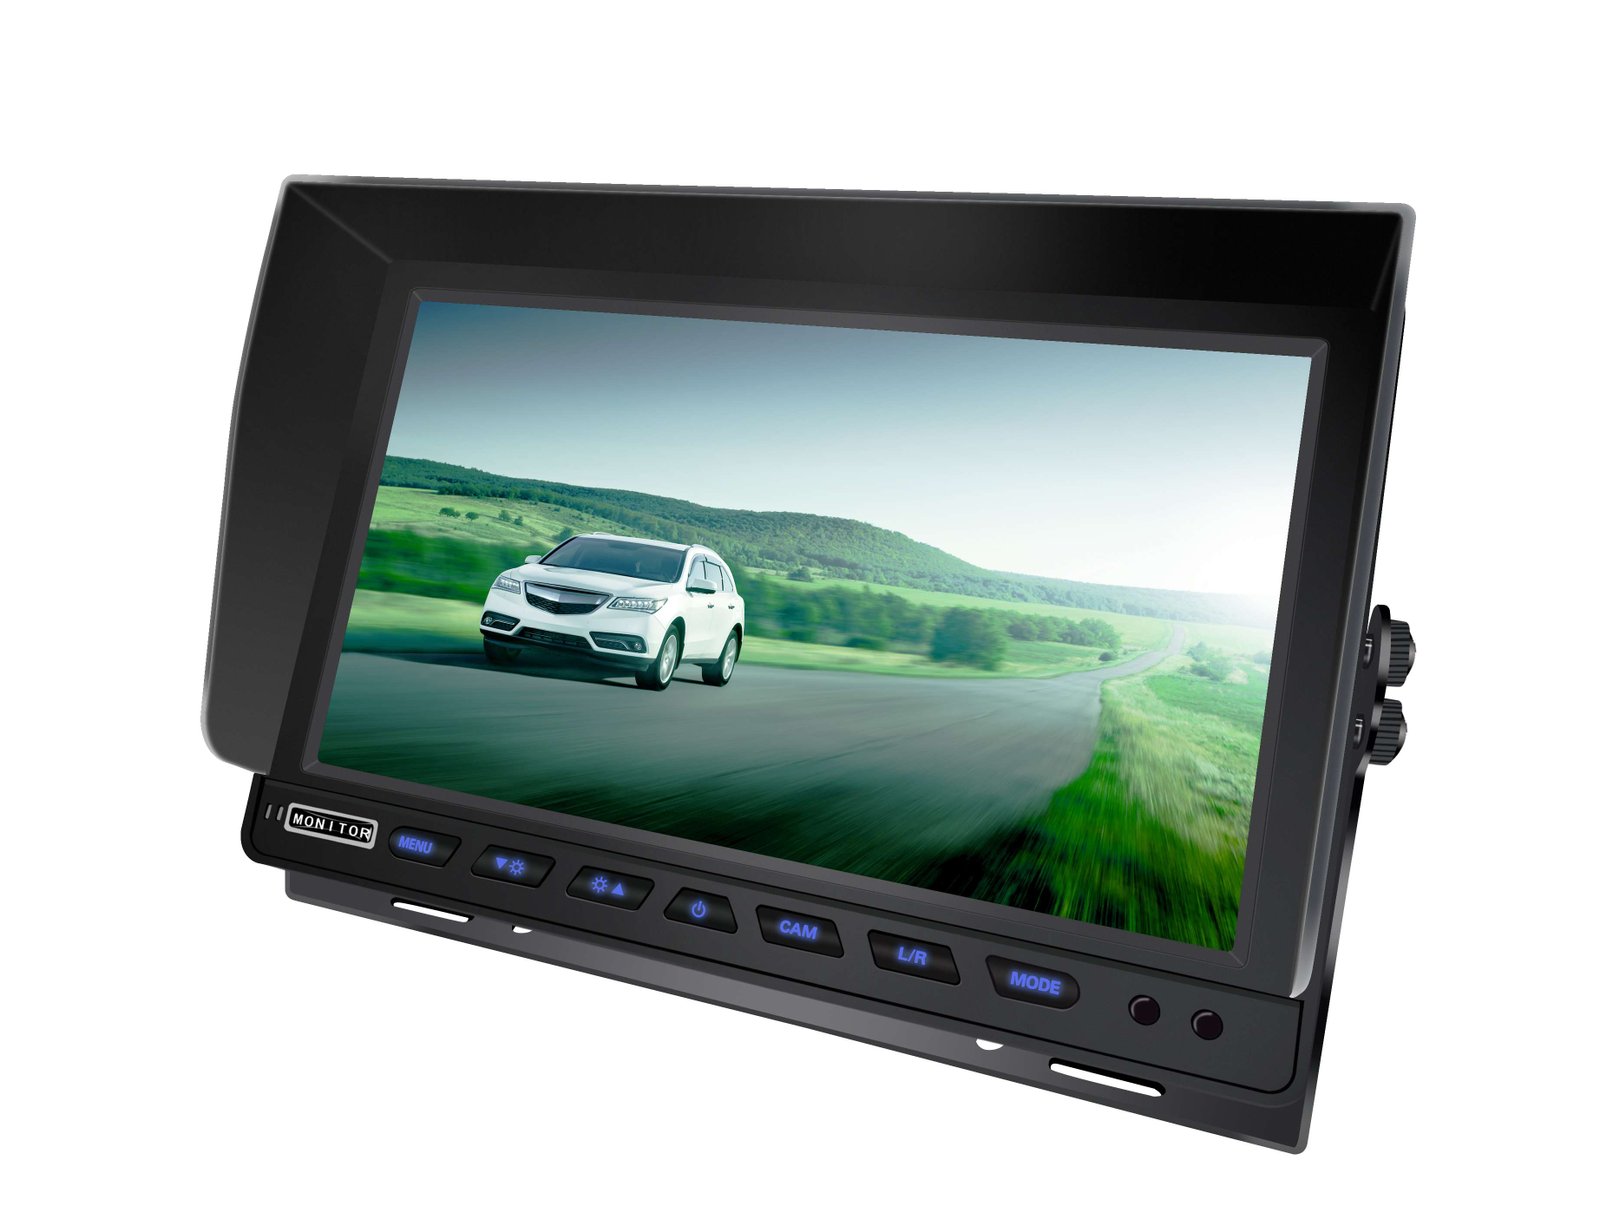 10.1-inch AHD vehicle-mounted display, specially designed for trucks and commercial vehicles